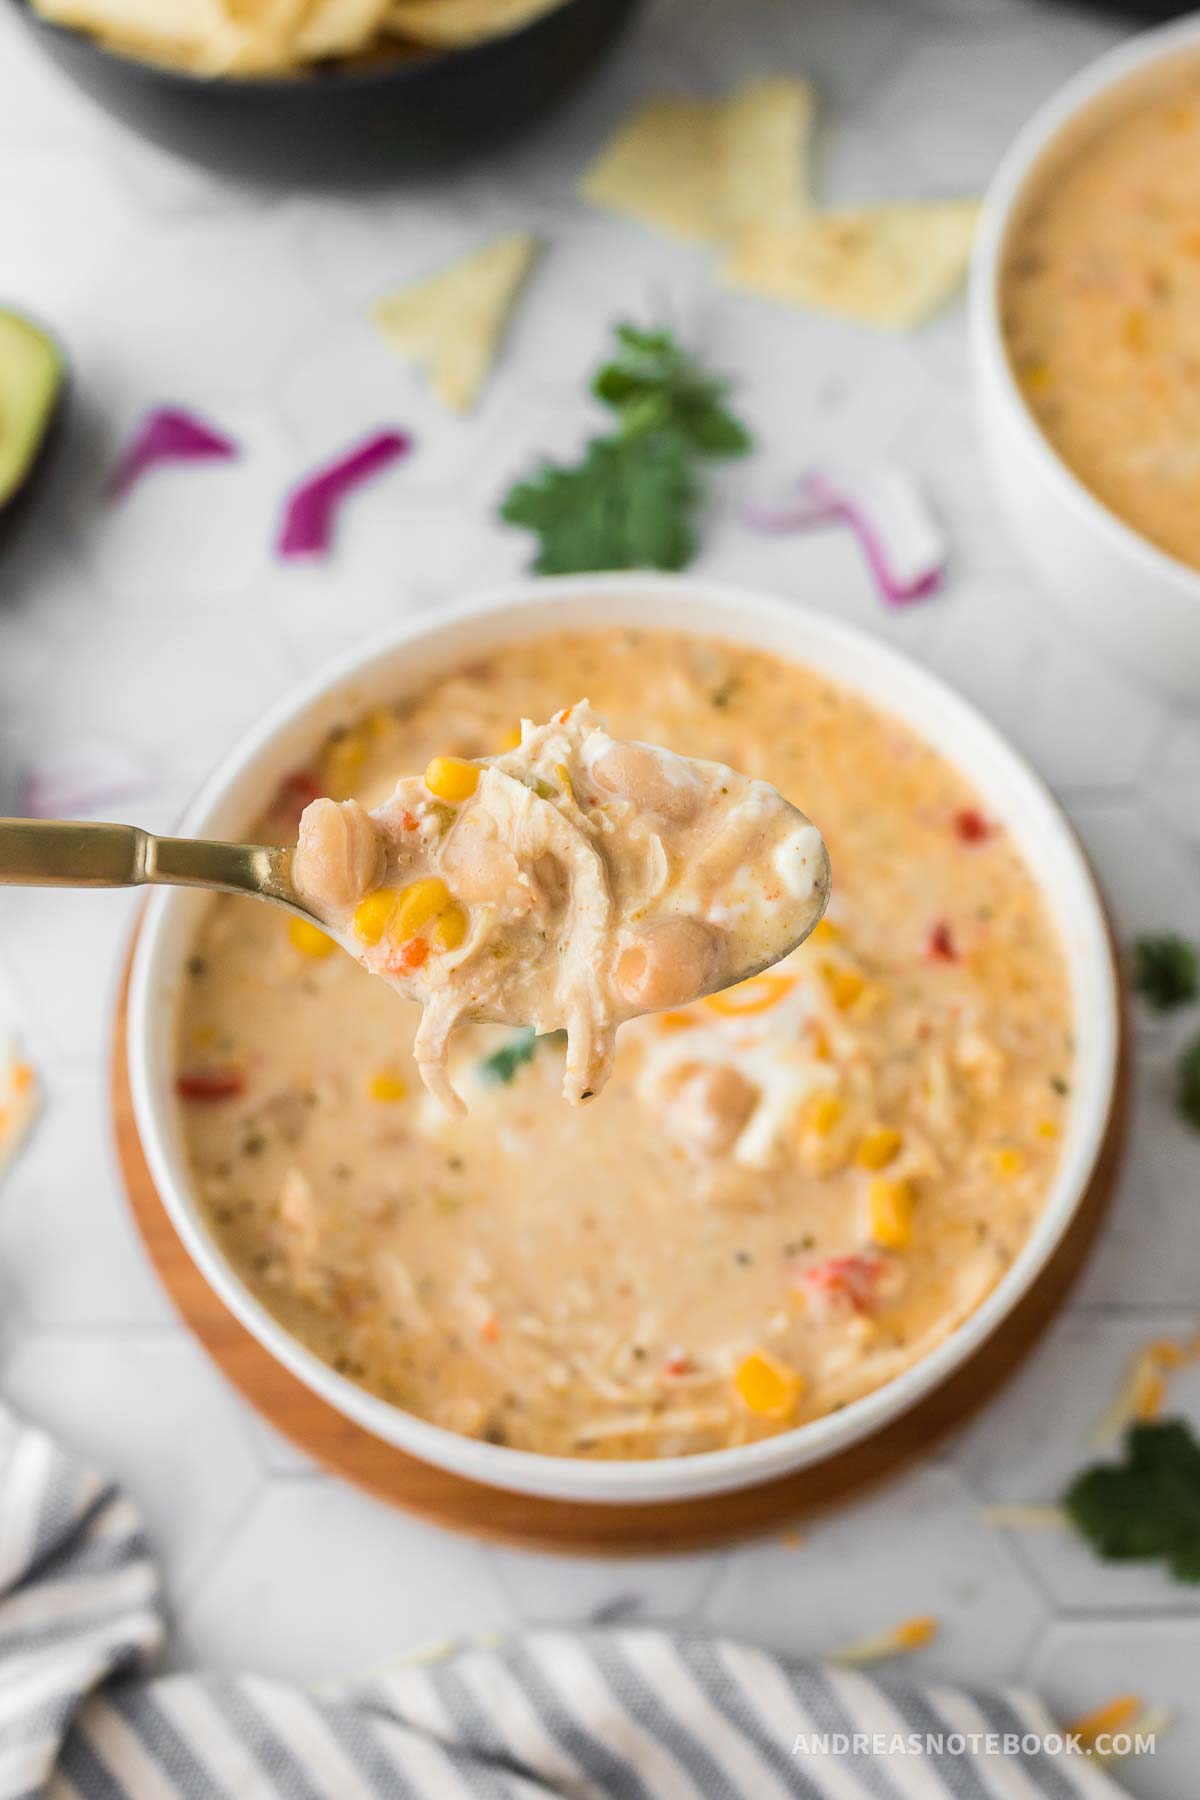 Spoon scooping up Instant Pot white chicken chili.